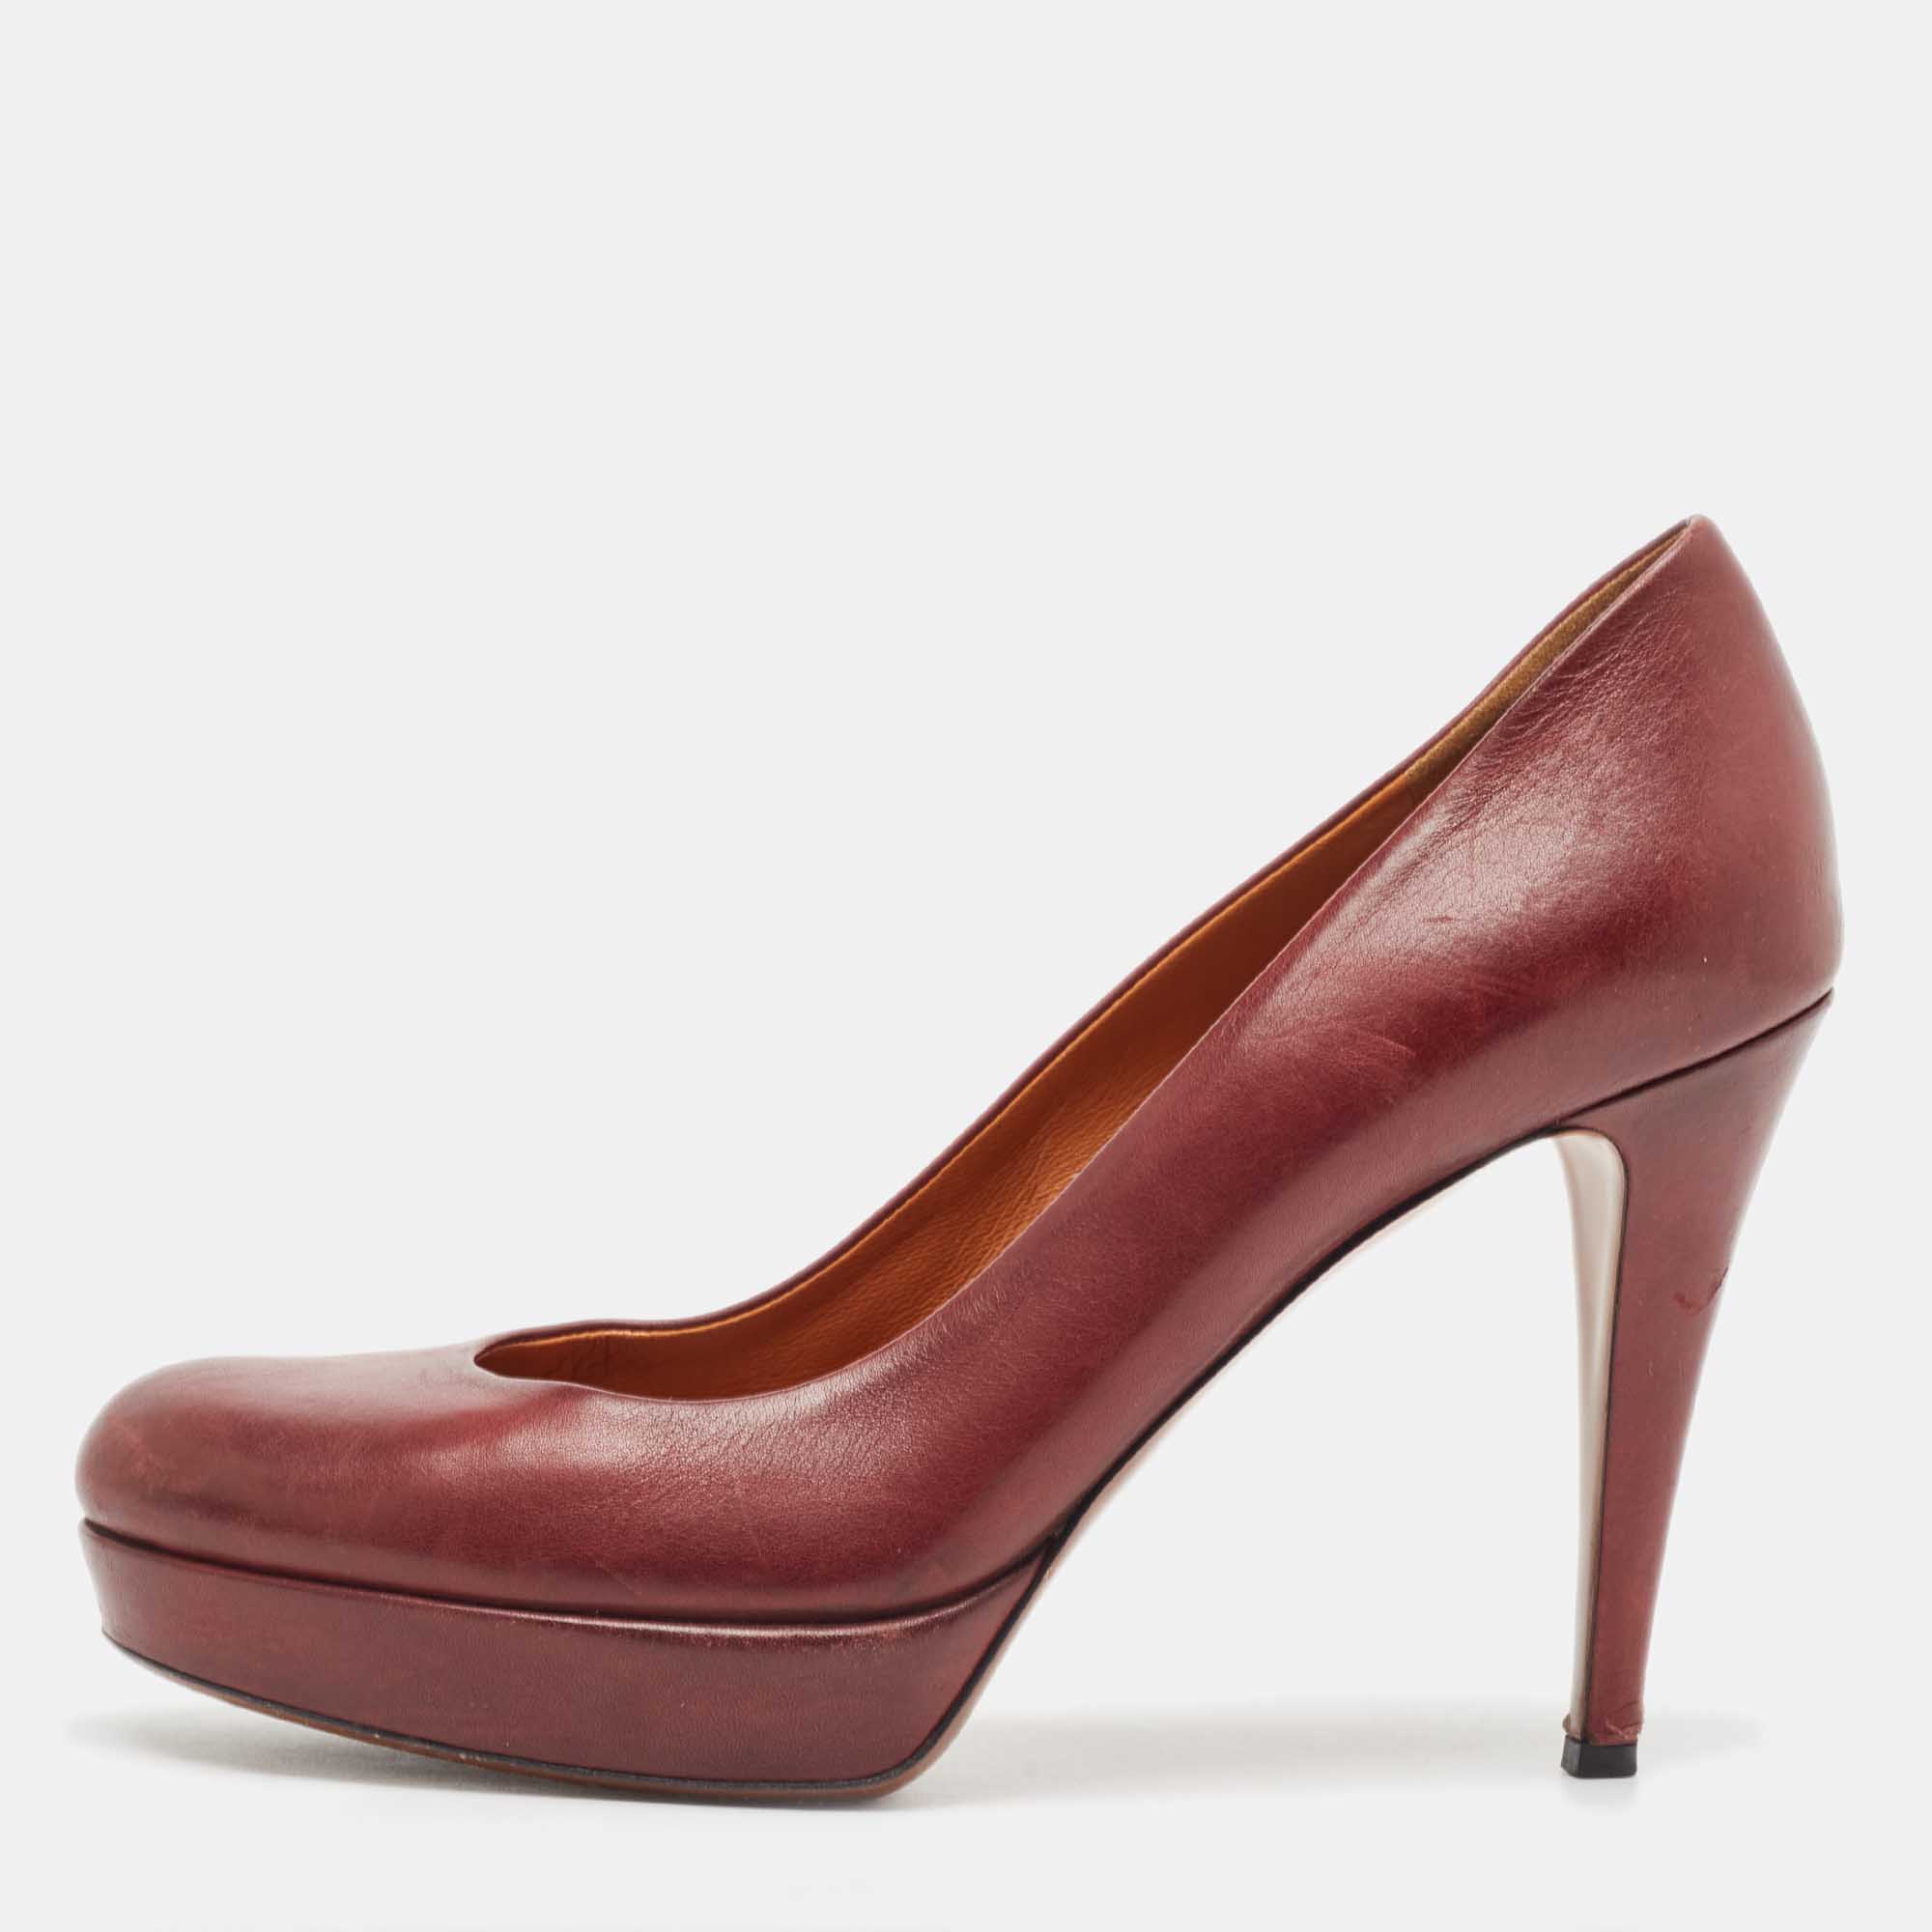 Guccis classy take on footwear is captured in this design. The pumps are wonderfully crafted using high quality materials and set on durable soles. Wear yours with cropped hemlines to spotlight the modern construction.